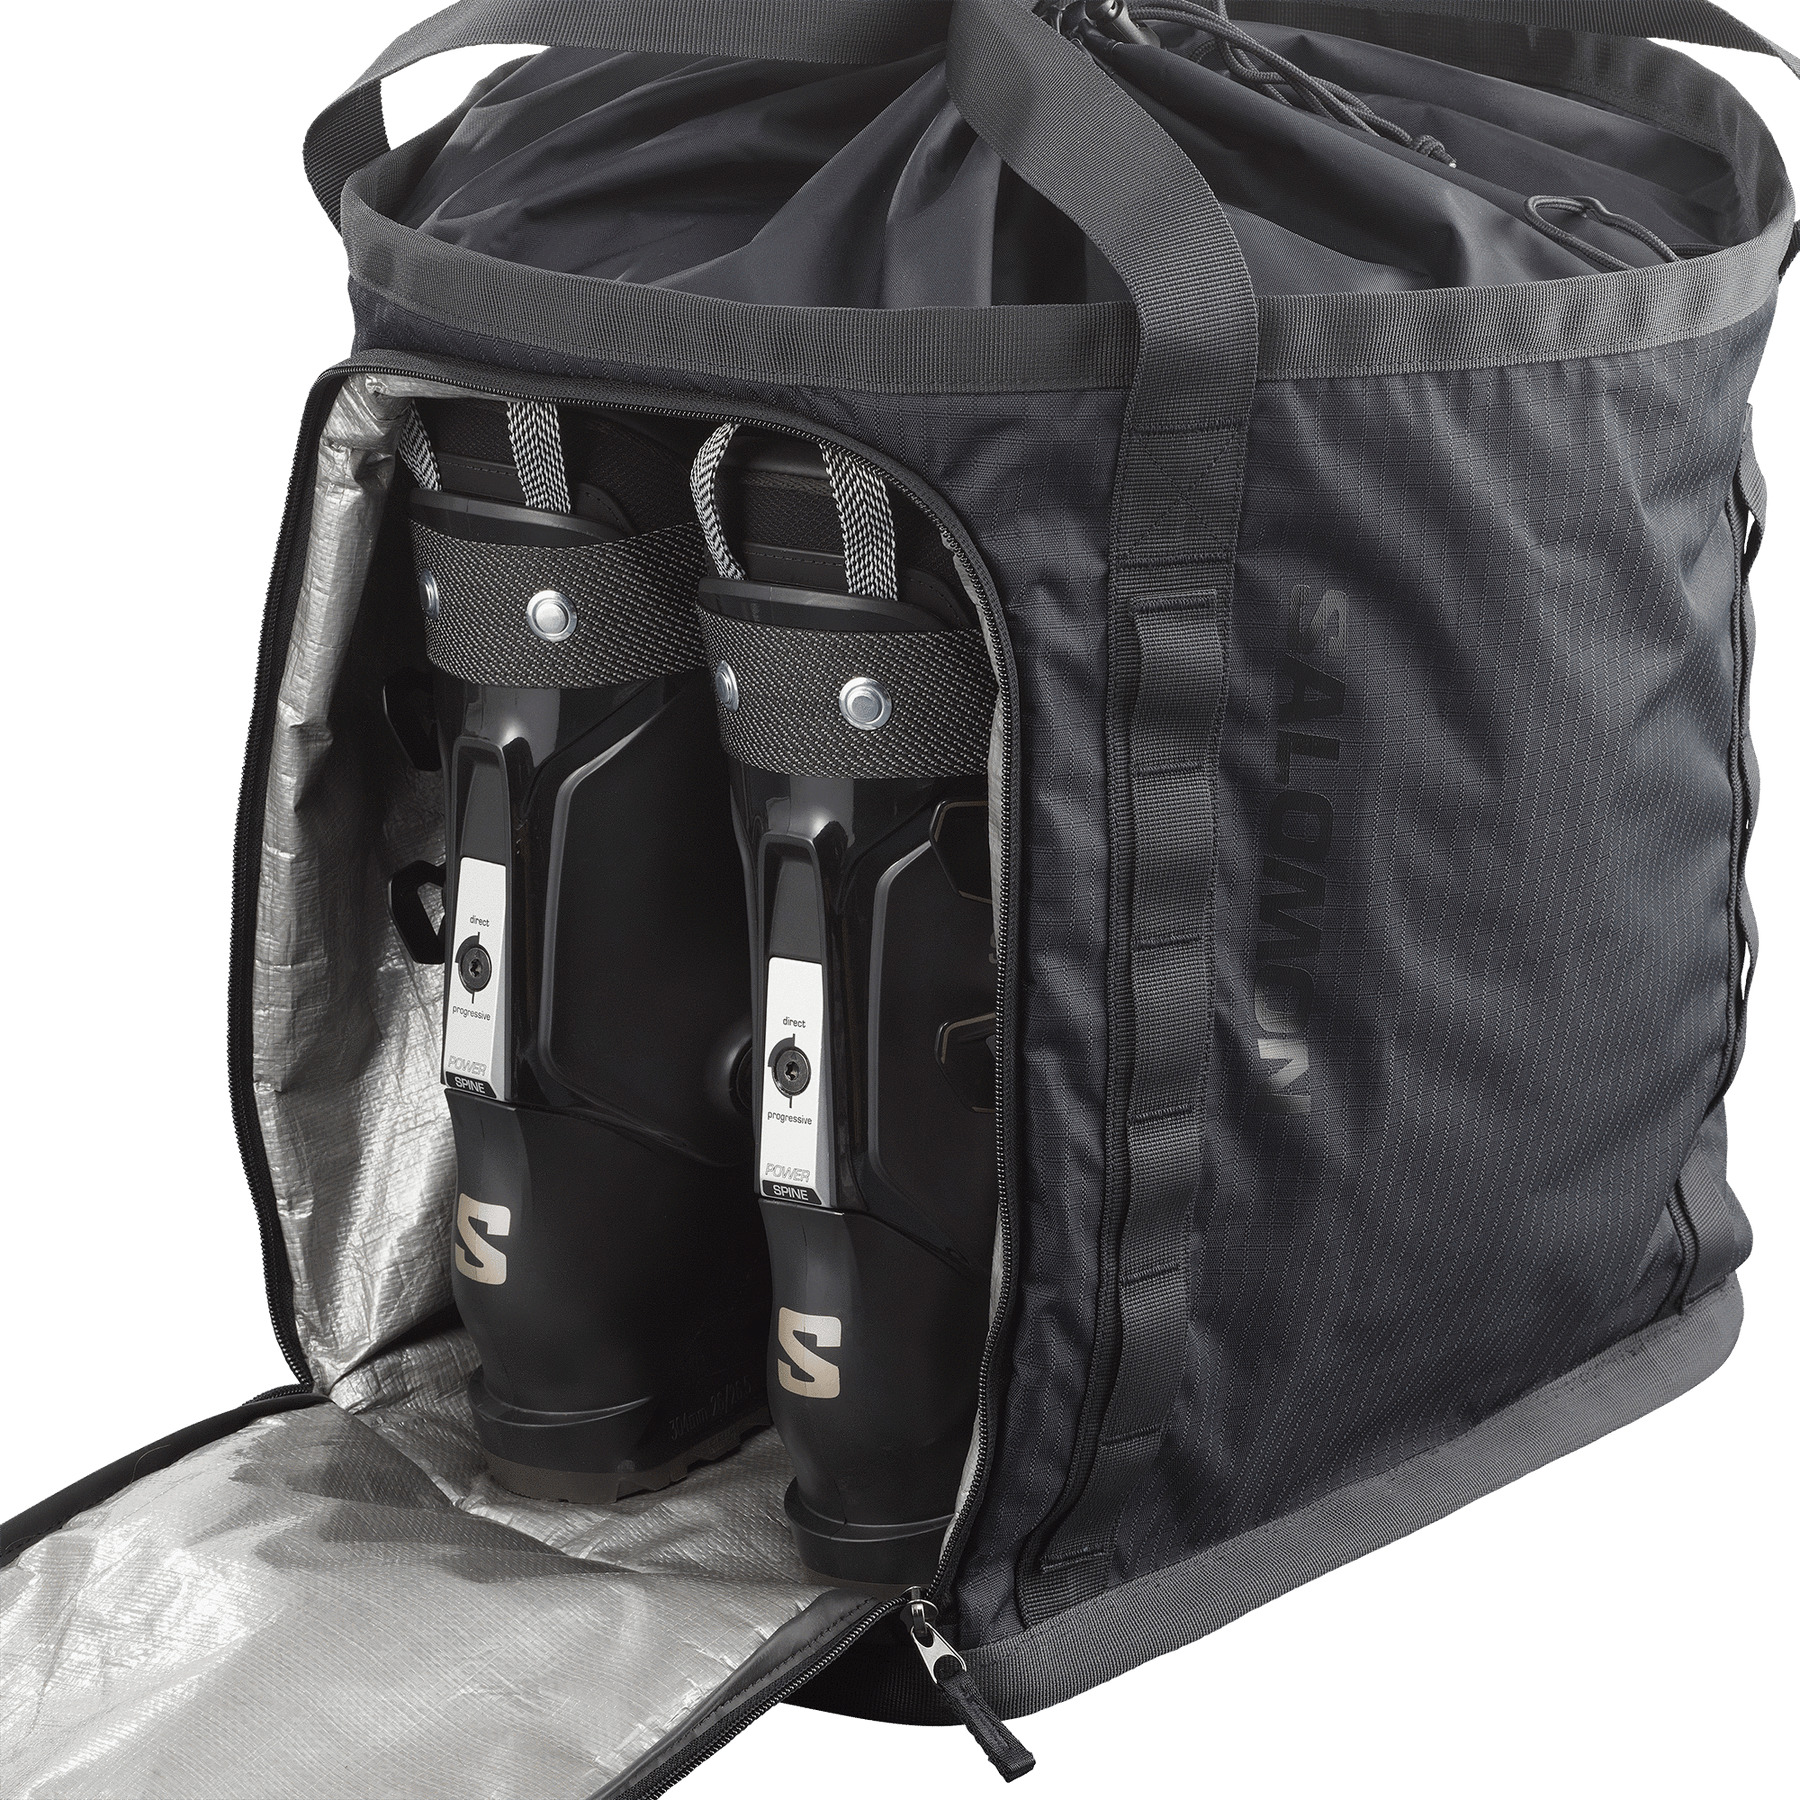 EXTEND MAX GEARBAG - 7